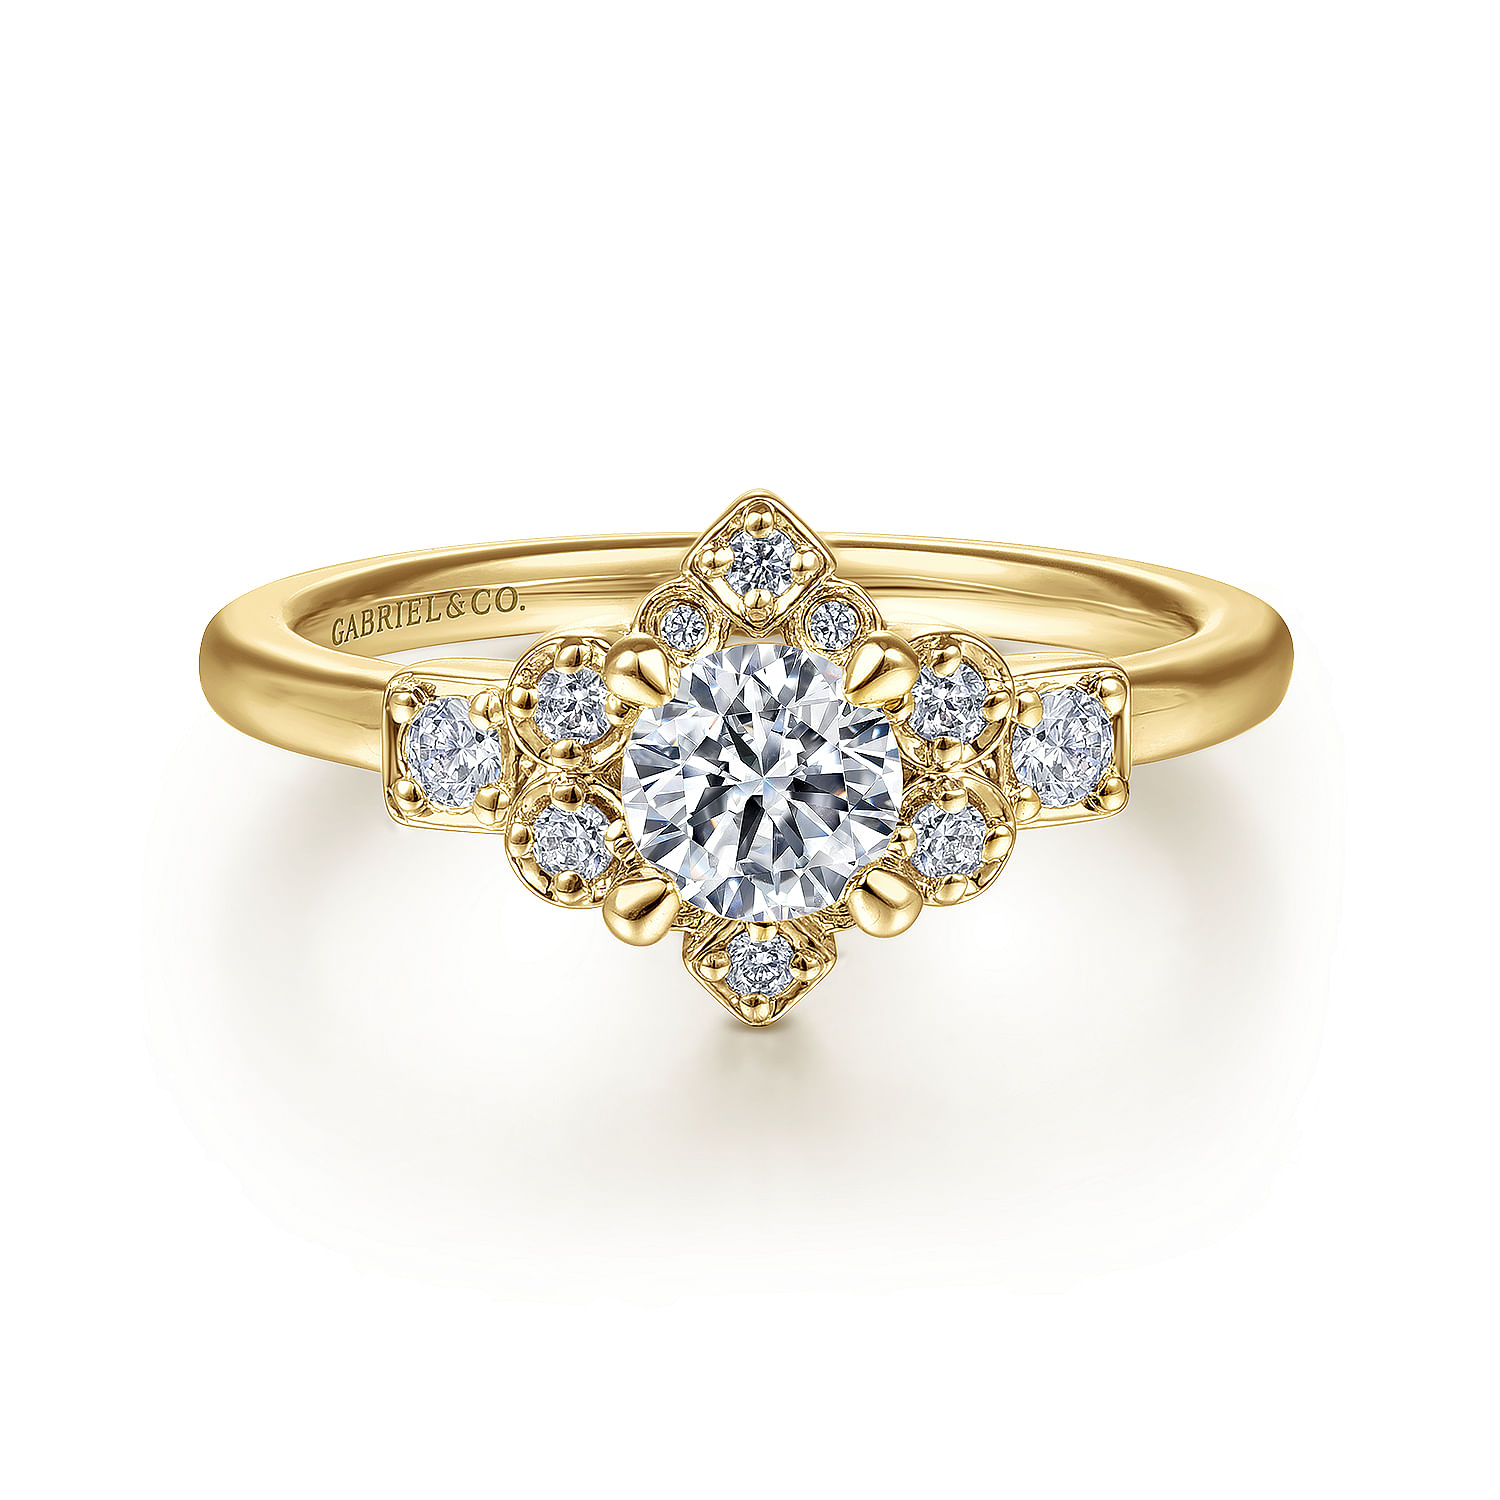 Raleigh - Unique 14K Yellow Gold Halo Diamond Engagement Ring